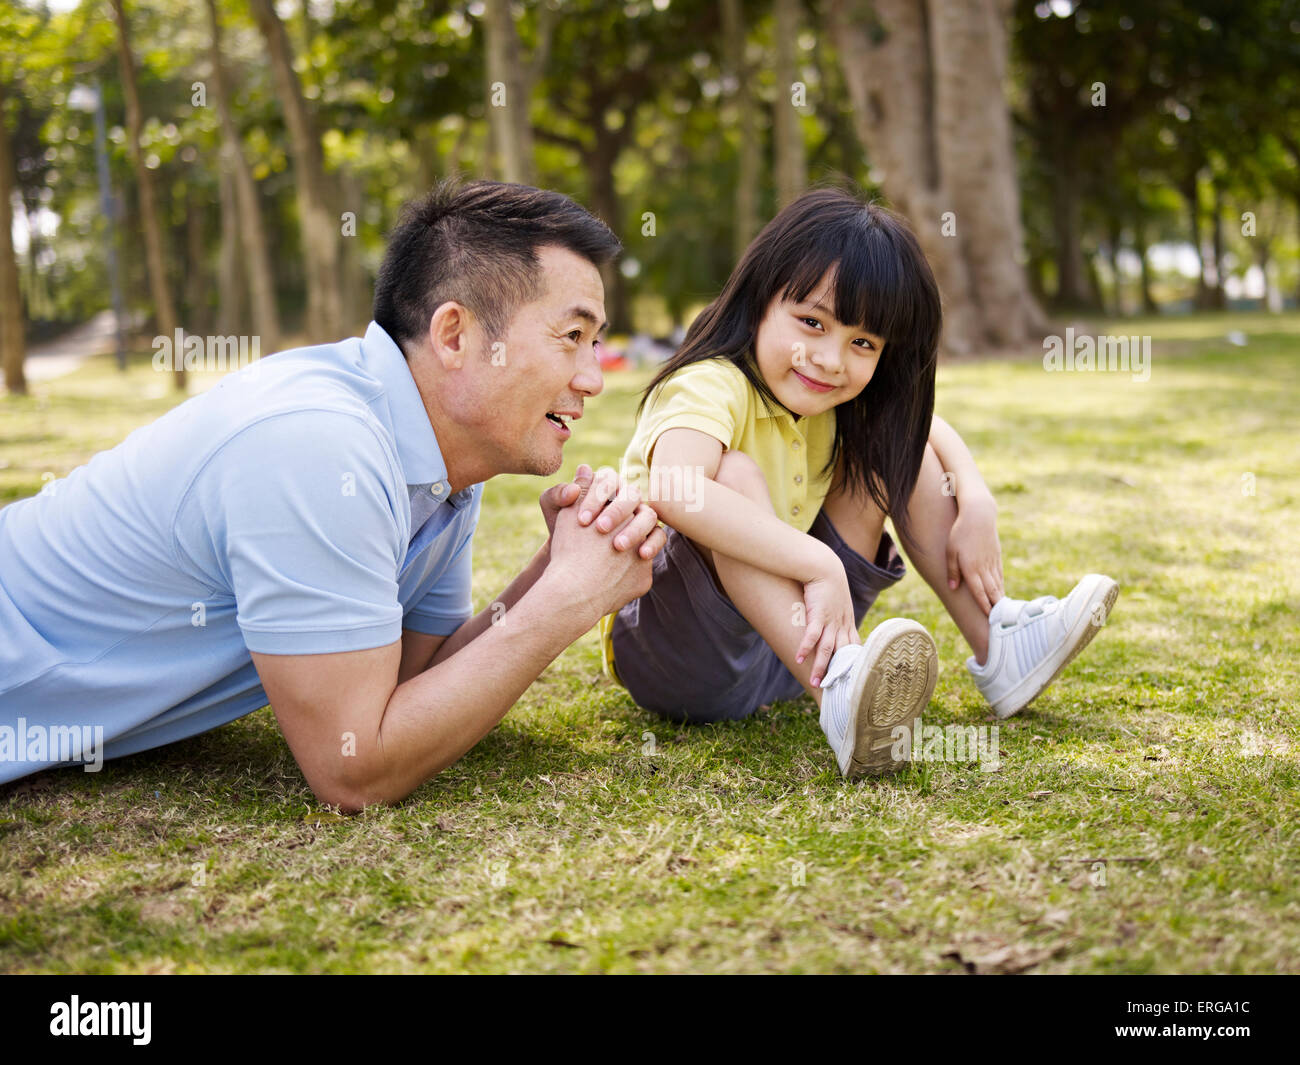 asian father and daughter outdoors Stock Photo